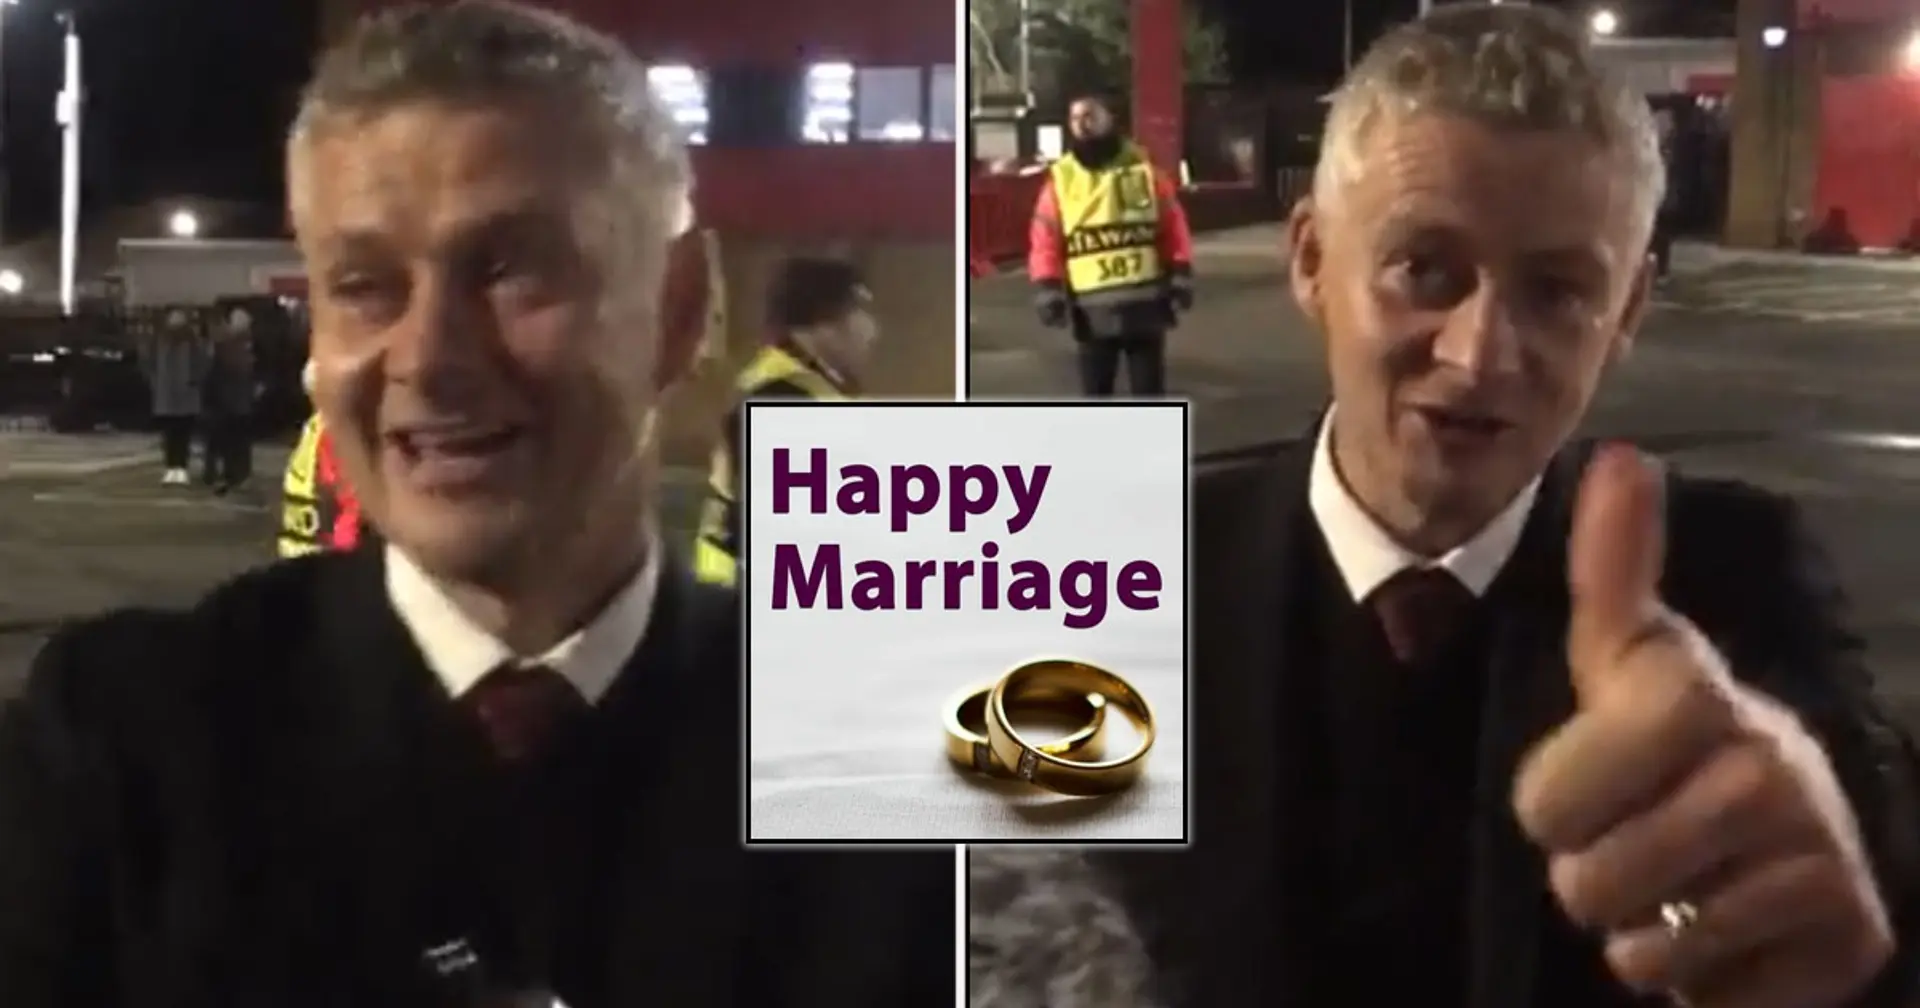 Solskjaer shows his class by wishing newly married couple outside Old Trafford